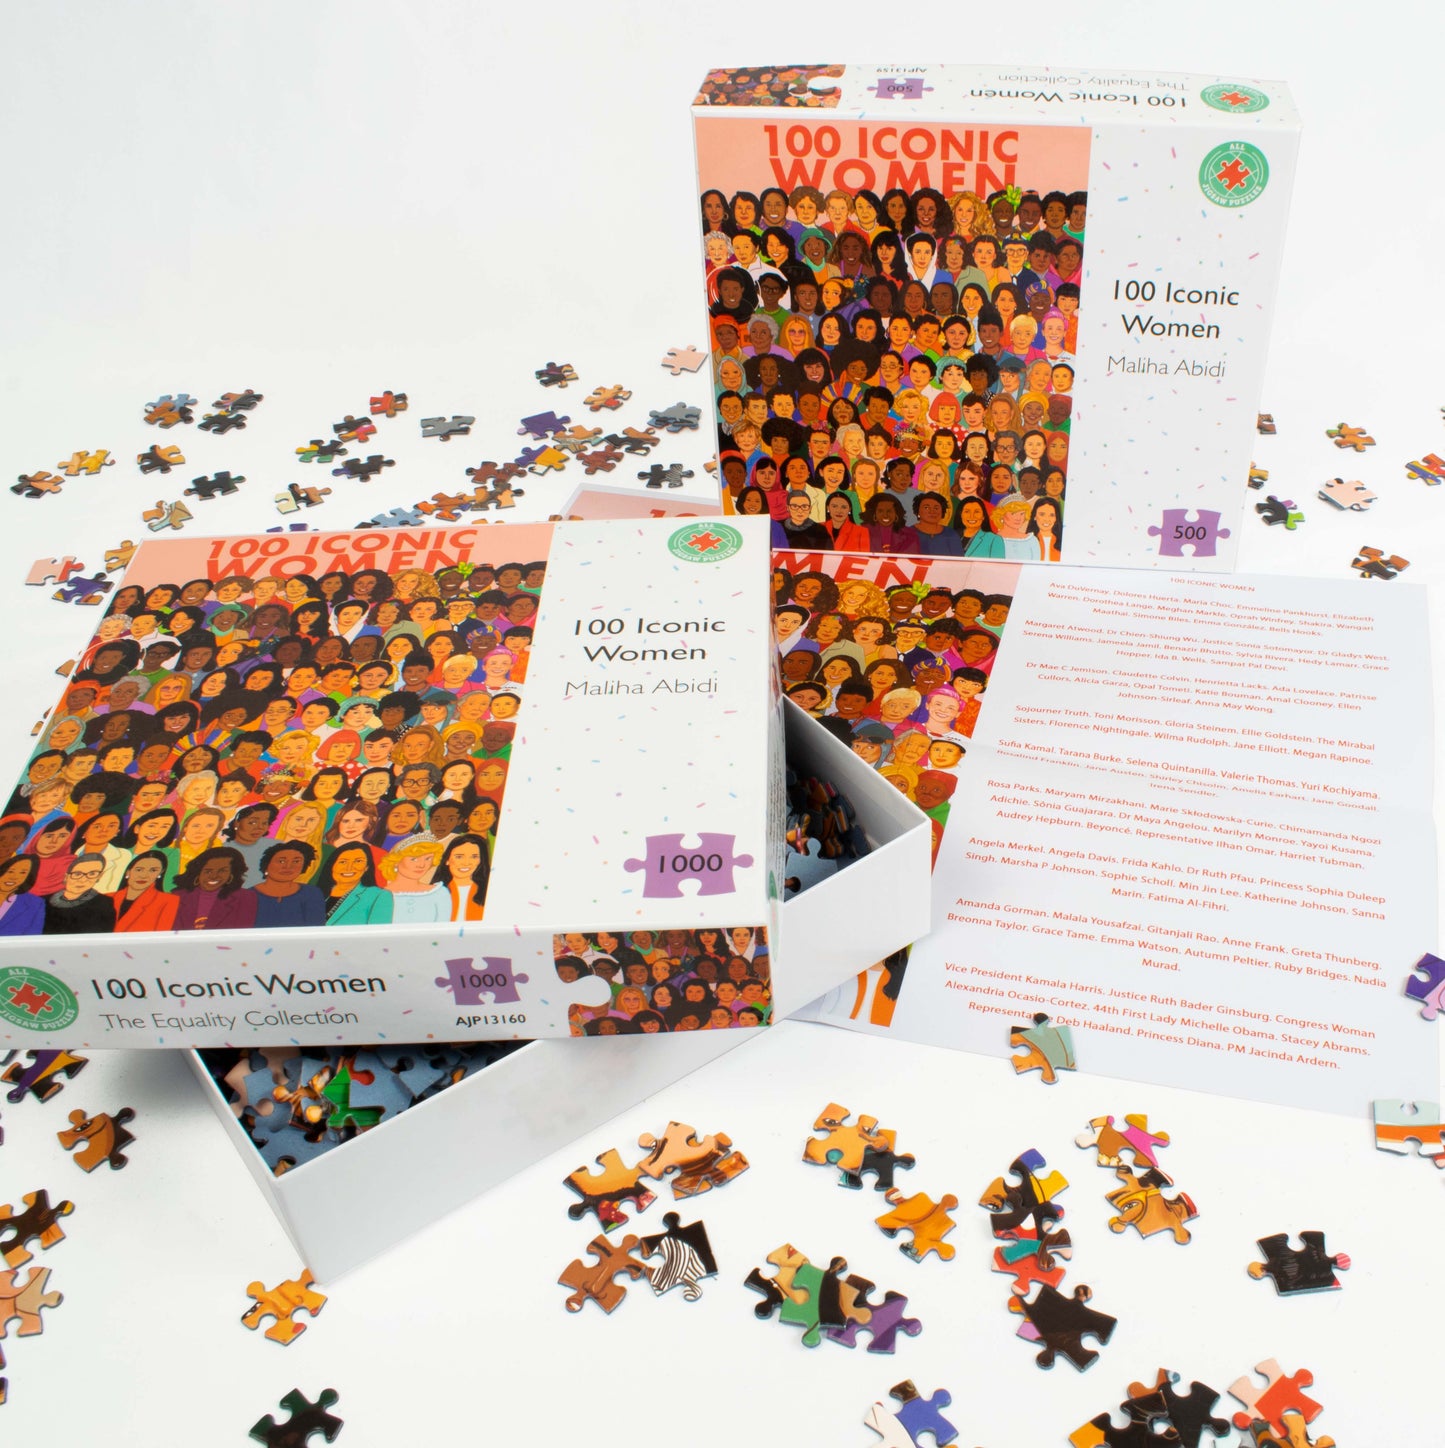 100 Iconic Women - 500 or 1000 Piece Jigsaw Puzzle